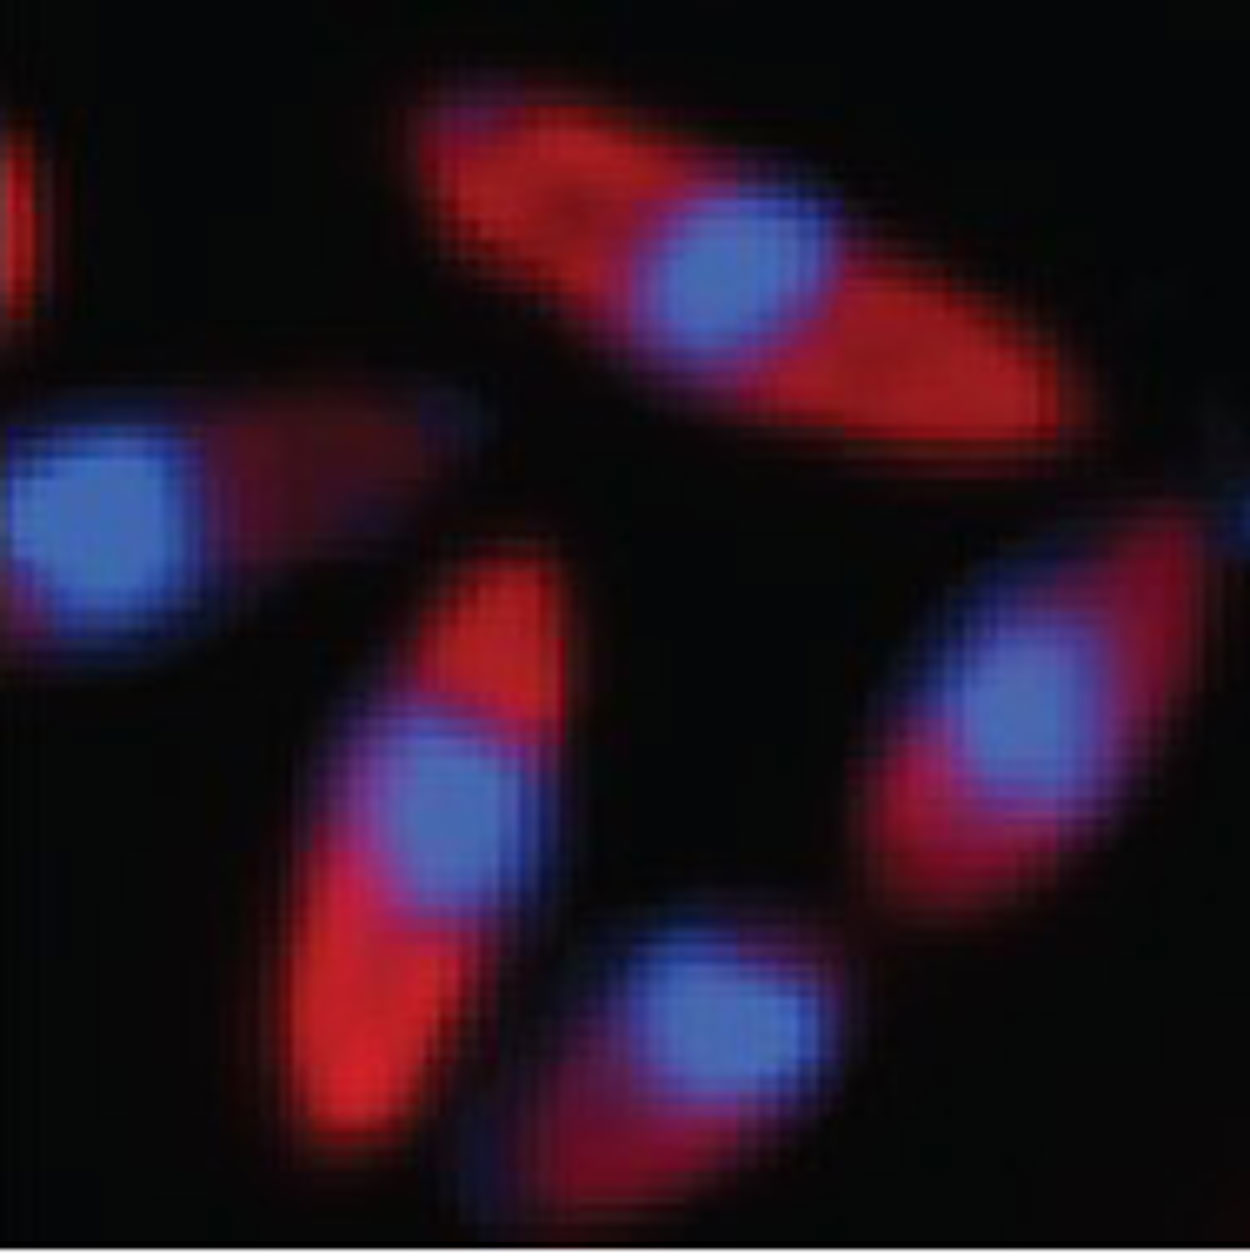 Microscopic photo of longated red-colored cells surrounding blue-colored cells.